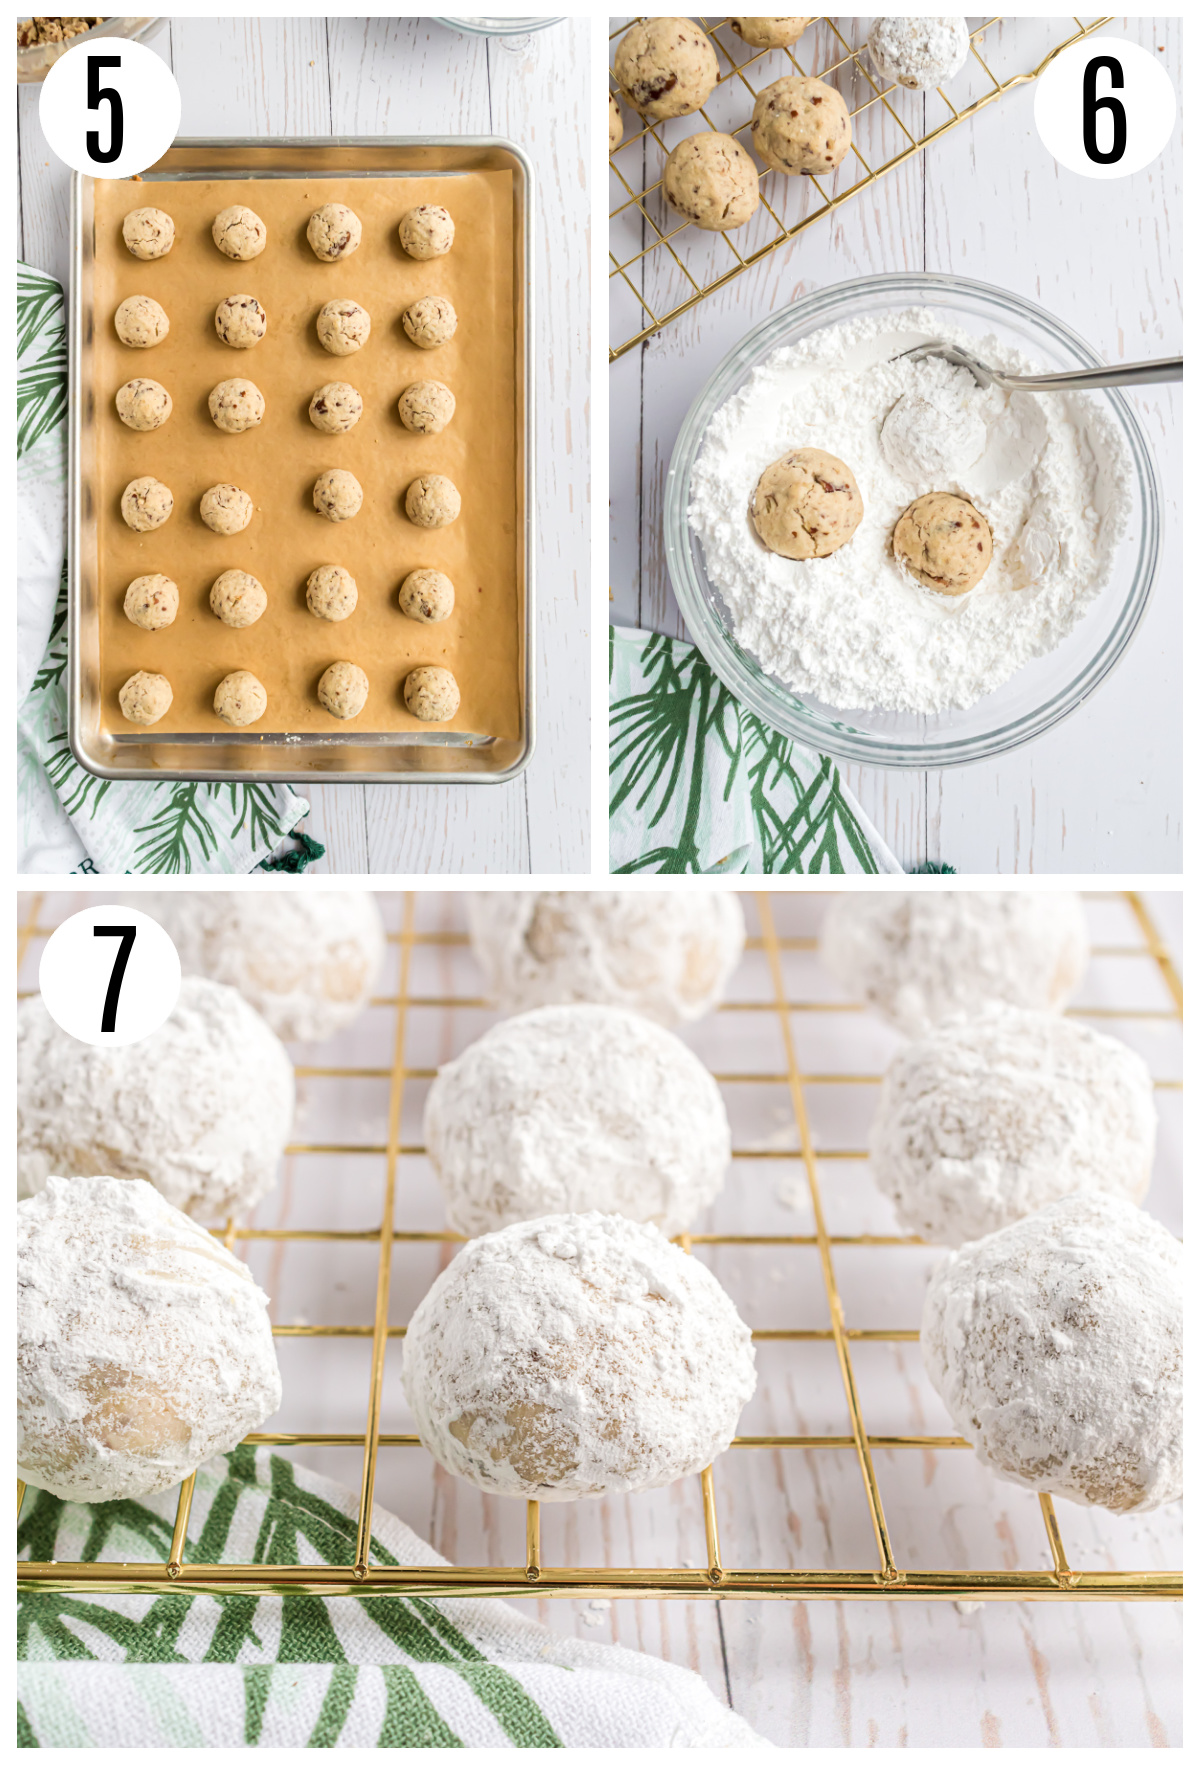 After baking, roll the cookies in powdered sugar and then place them on a cooling rack.